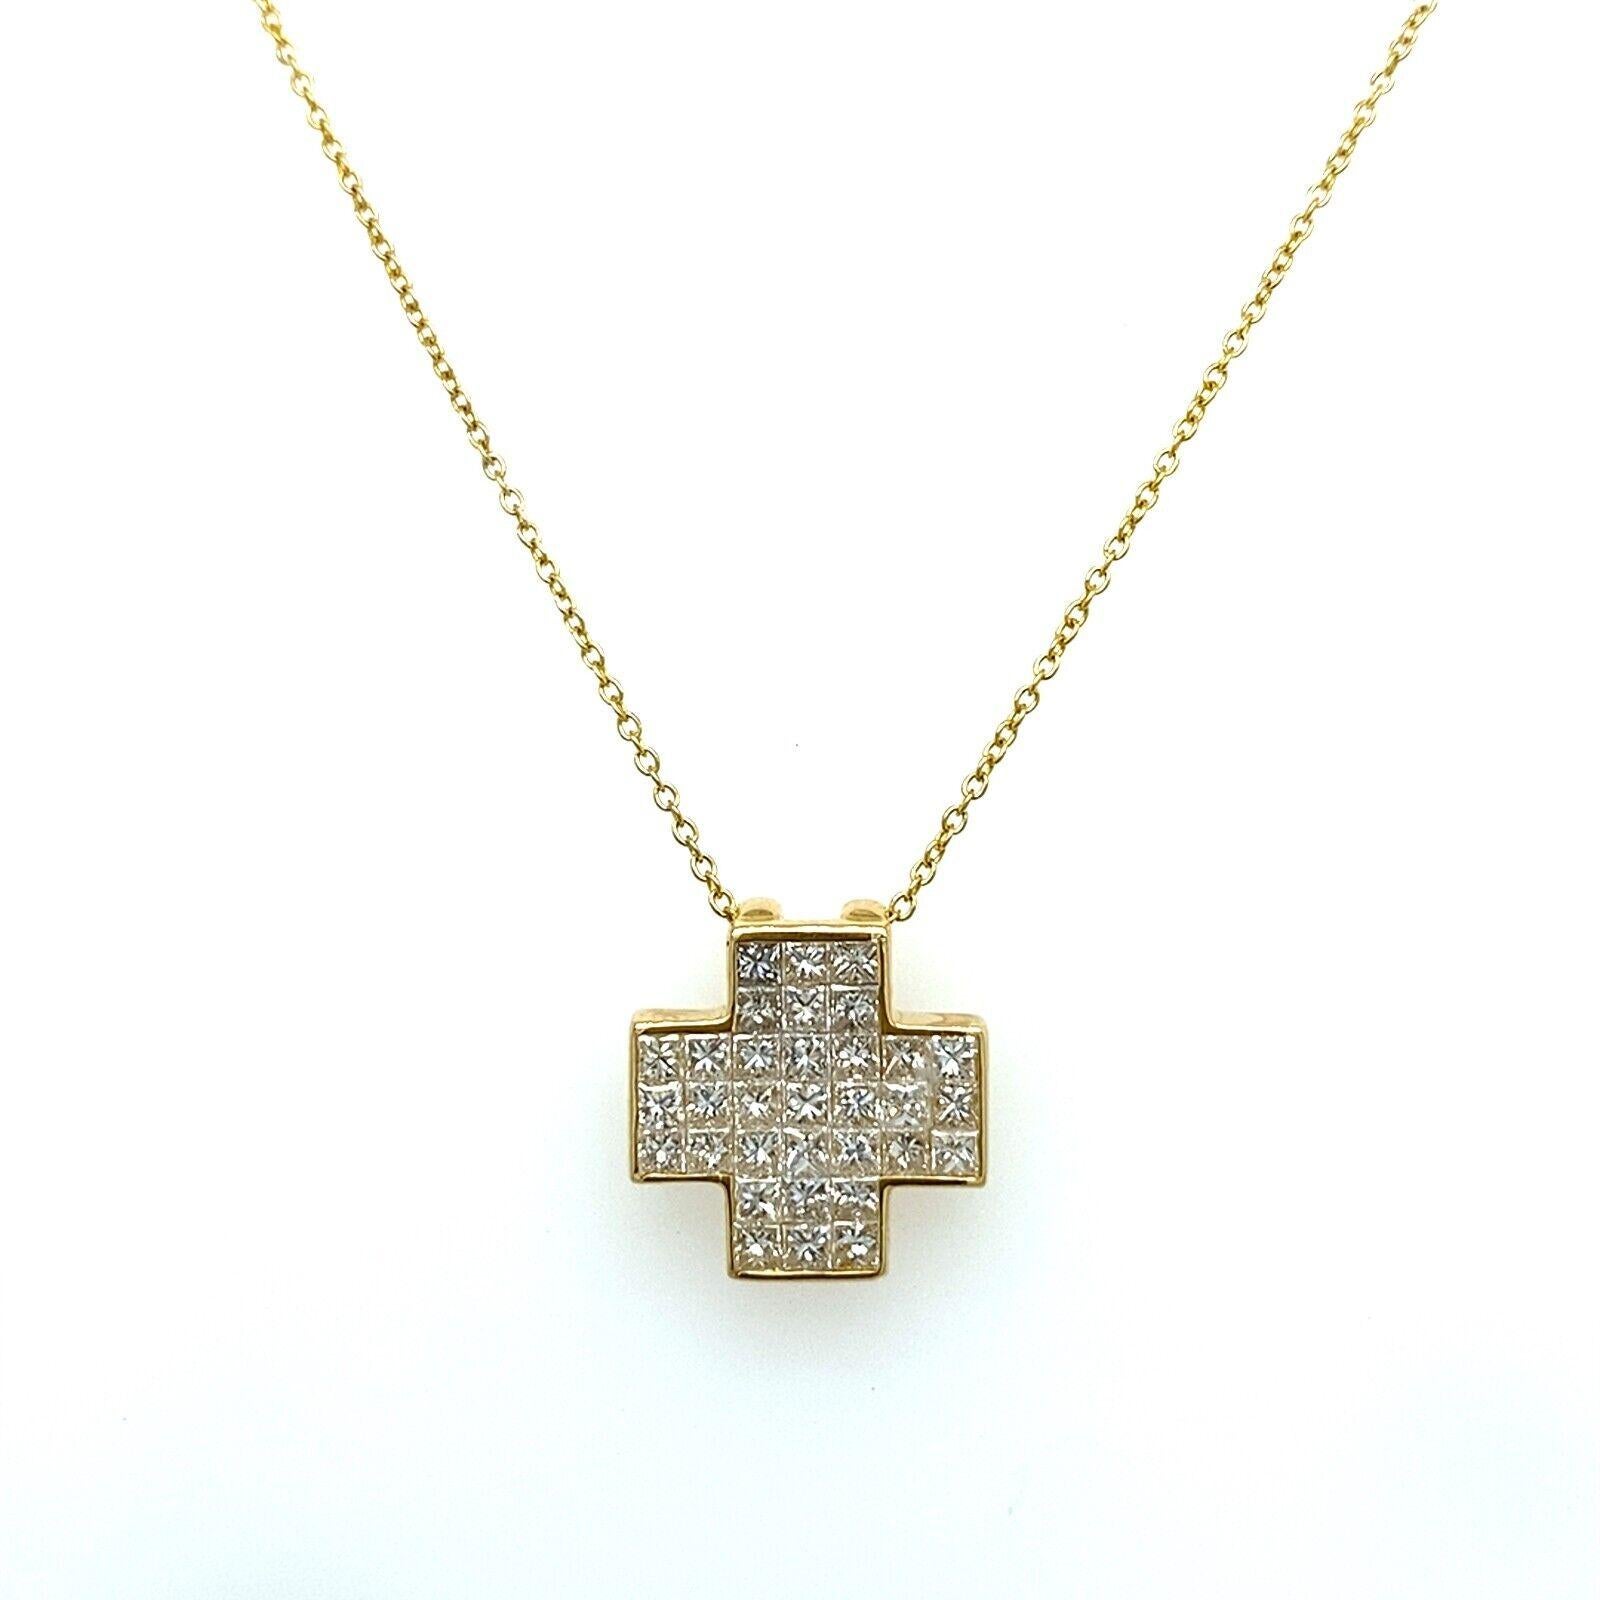 This exquisite cross pendant is made of 18ct yellow gold, with a total weight of 1.30ct princess cut diamonds. The diamonds are invisible set, suspended on 16